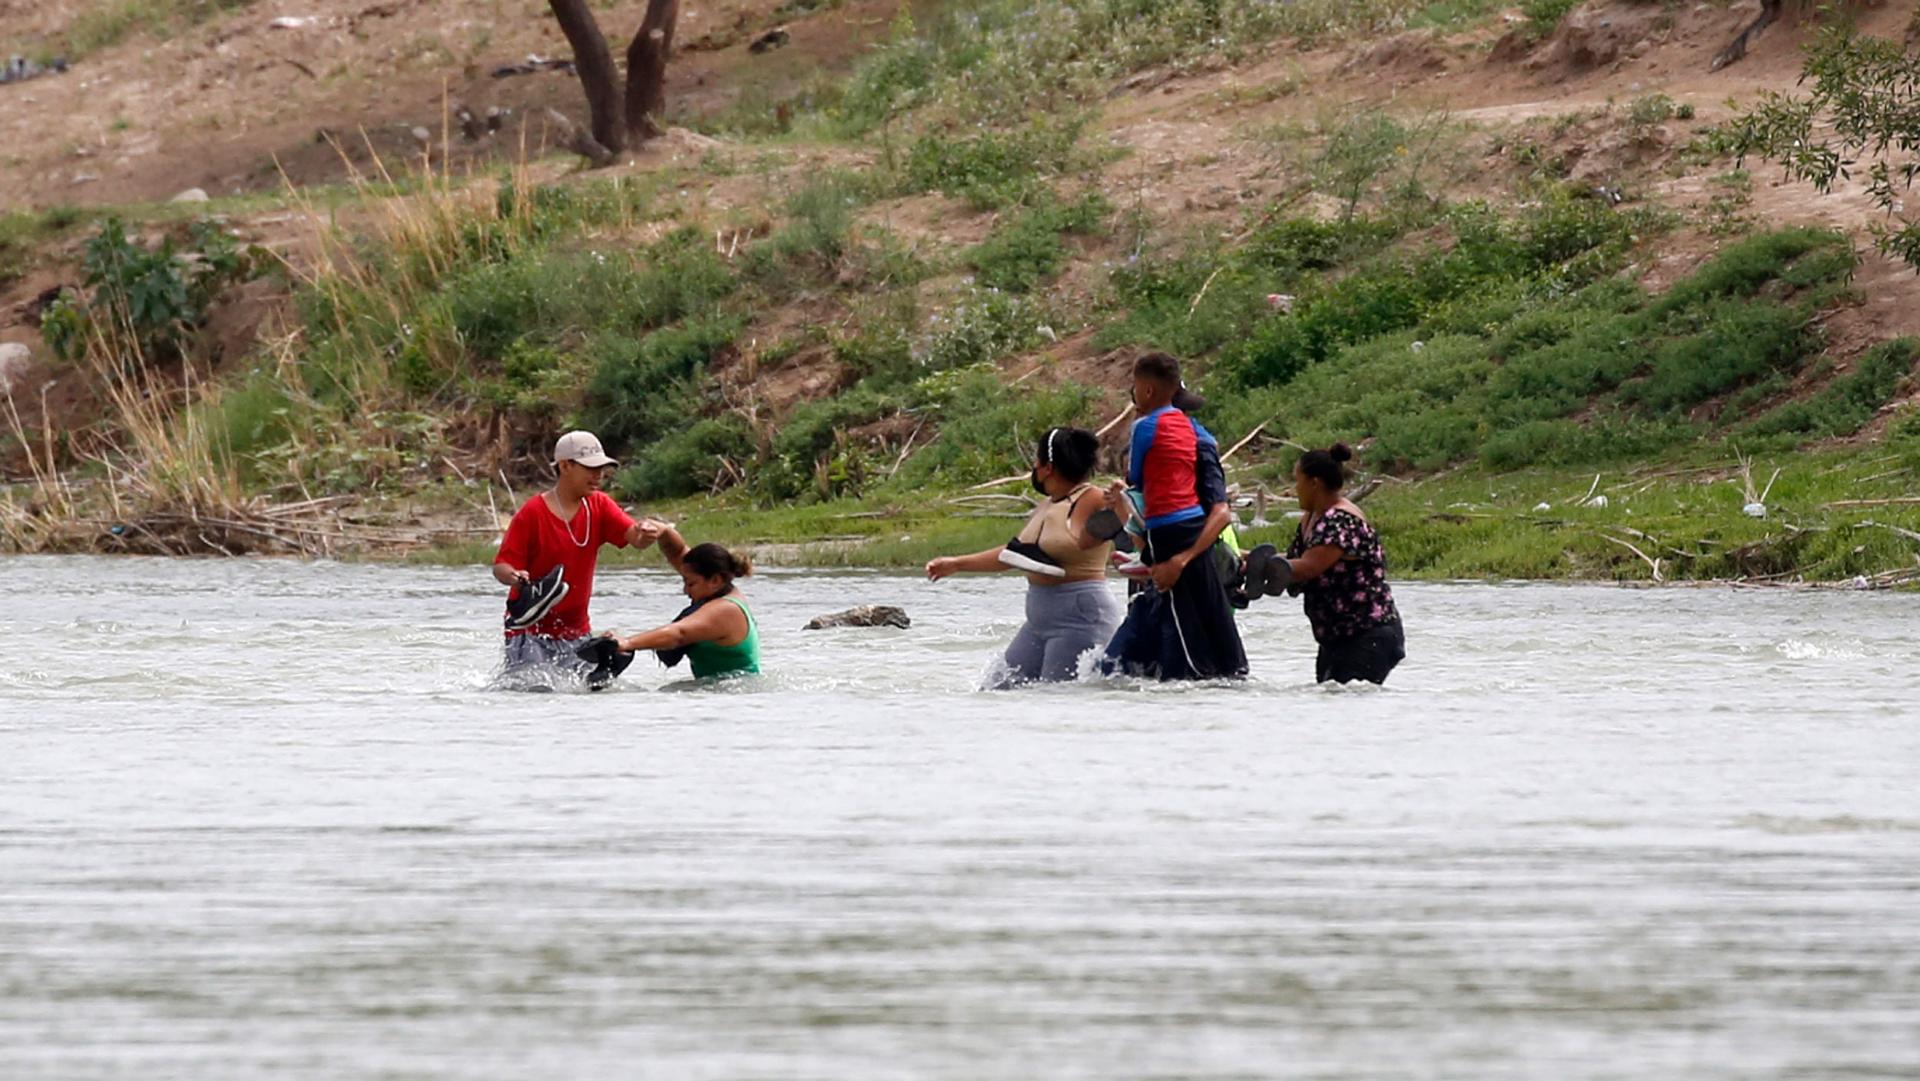 More Migrants Are Attempting To Cross Into The Us Via The Perilous Rio Grande The World From Prx 